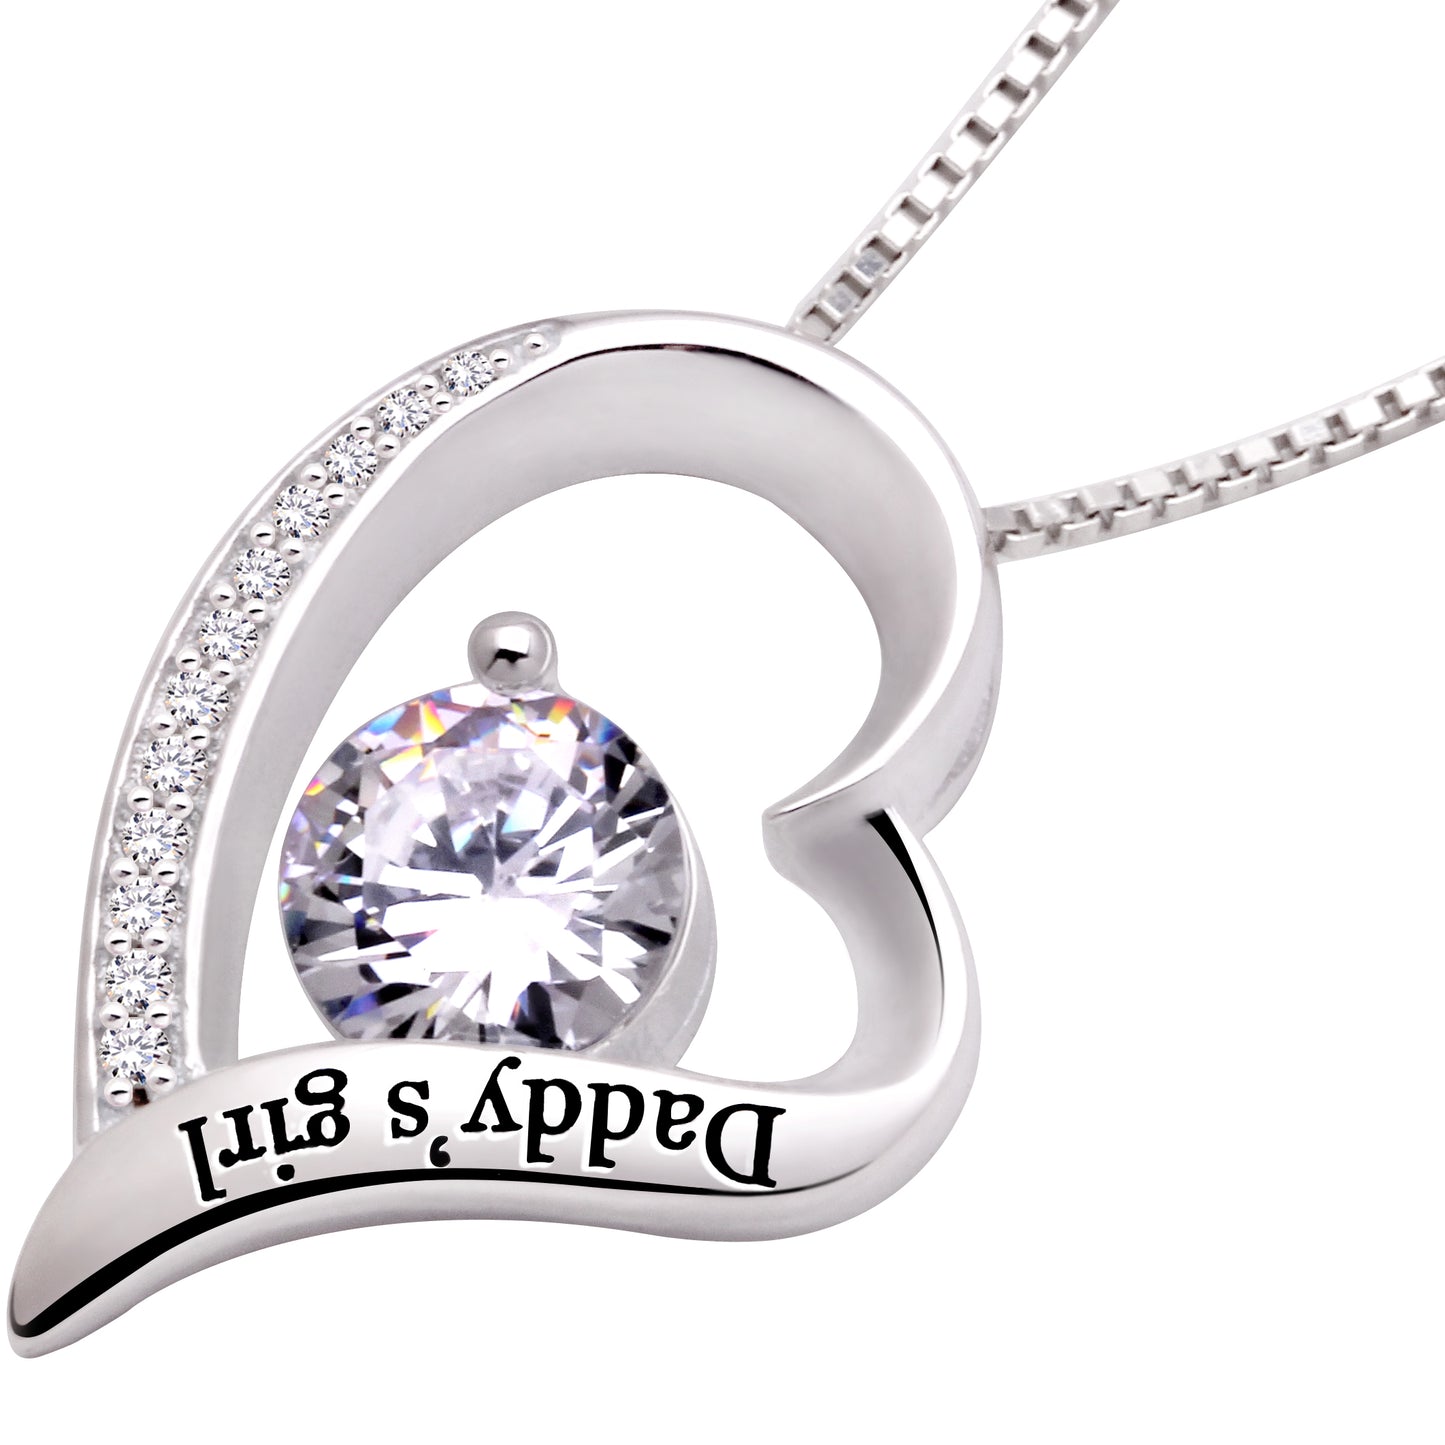 ALOV Jewelry Sterling Silver "Daddy's girl" Love Heart Cubic Zirconia Pendant Necklace